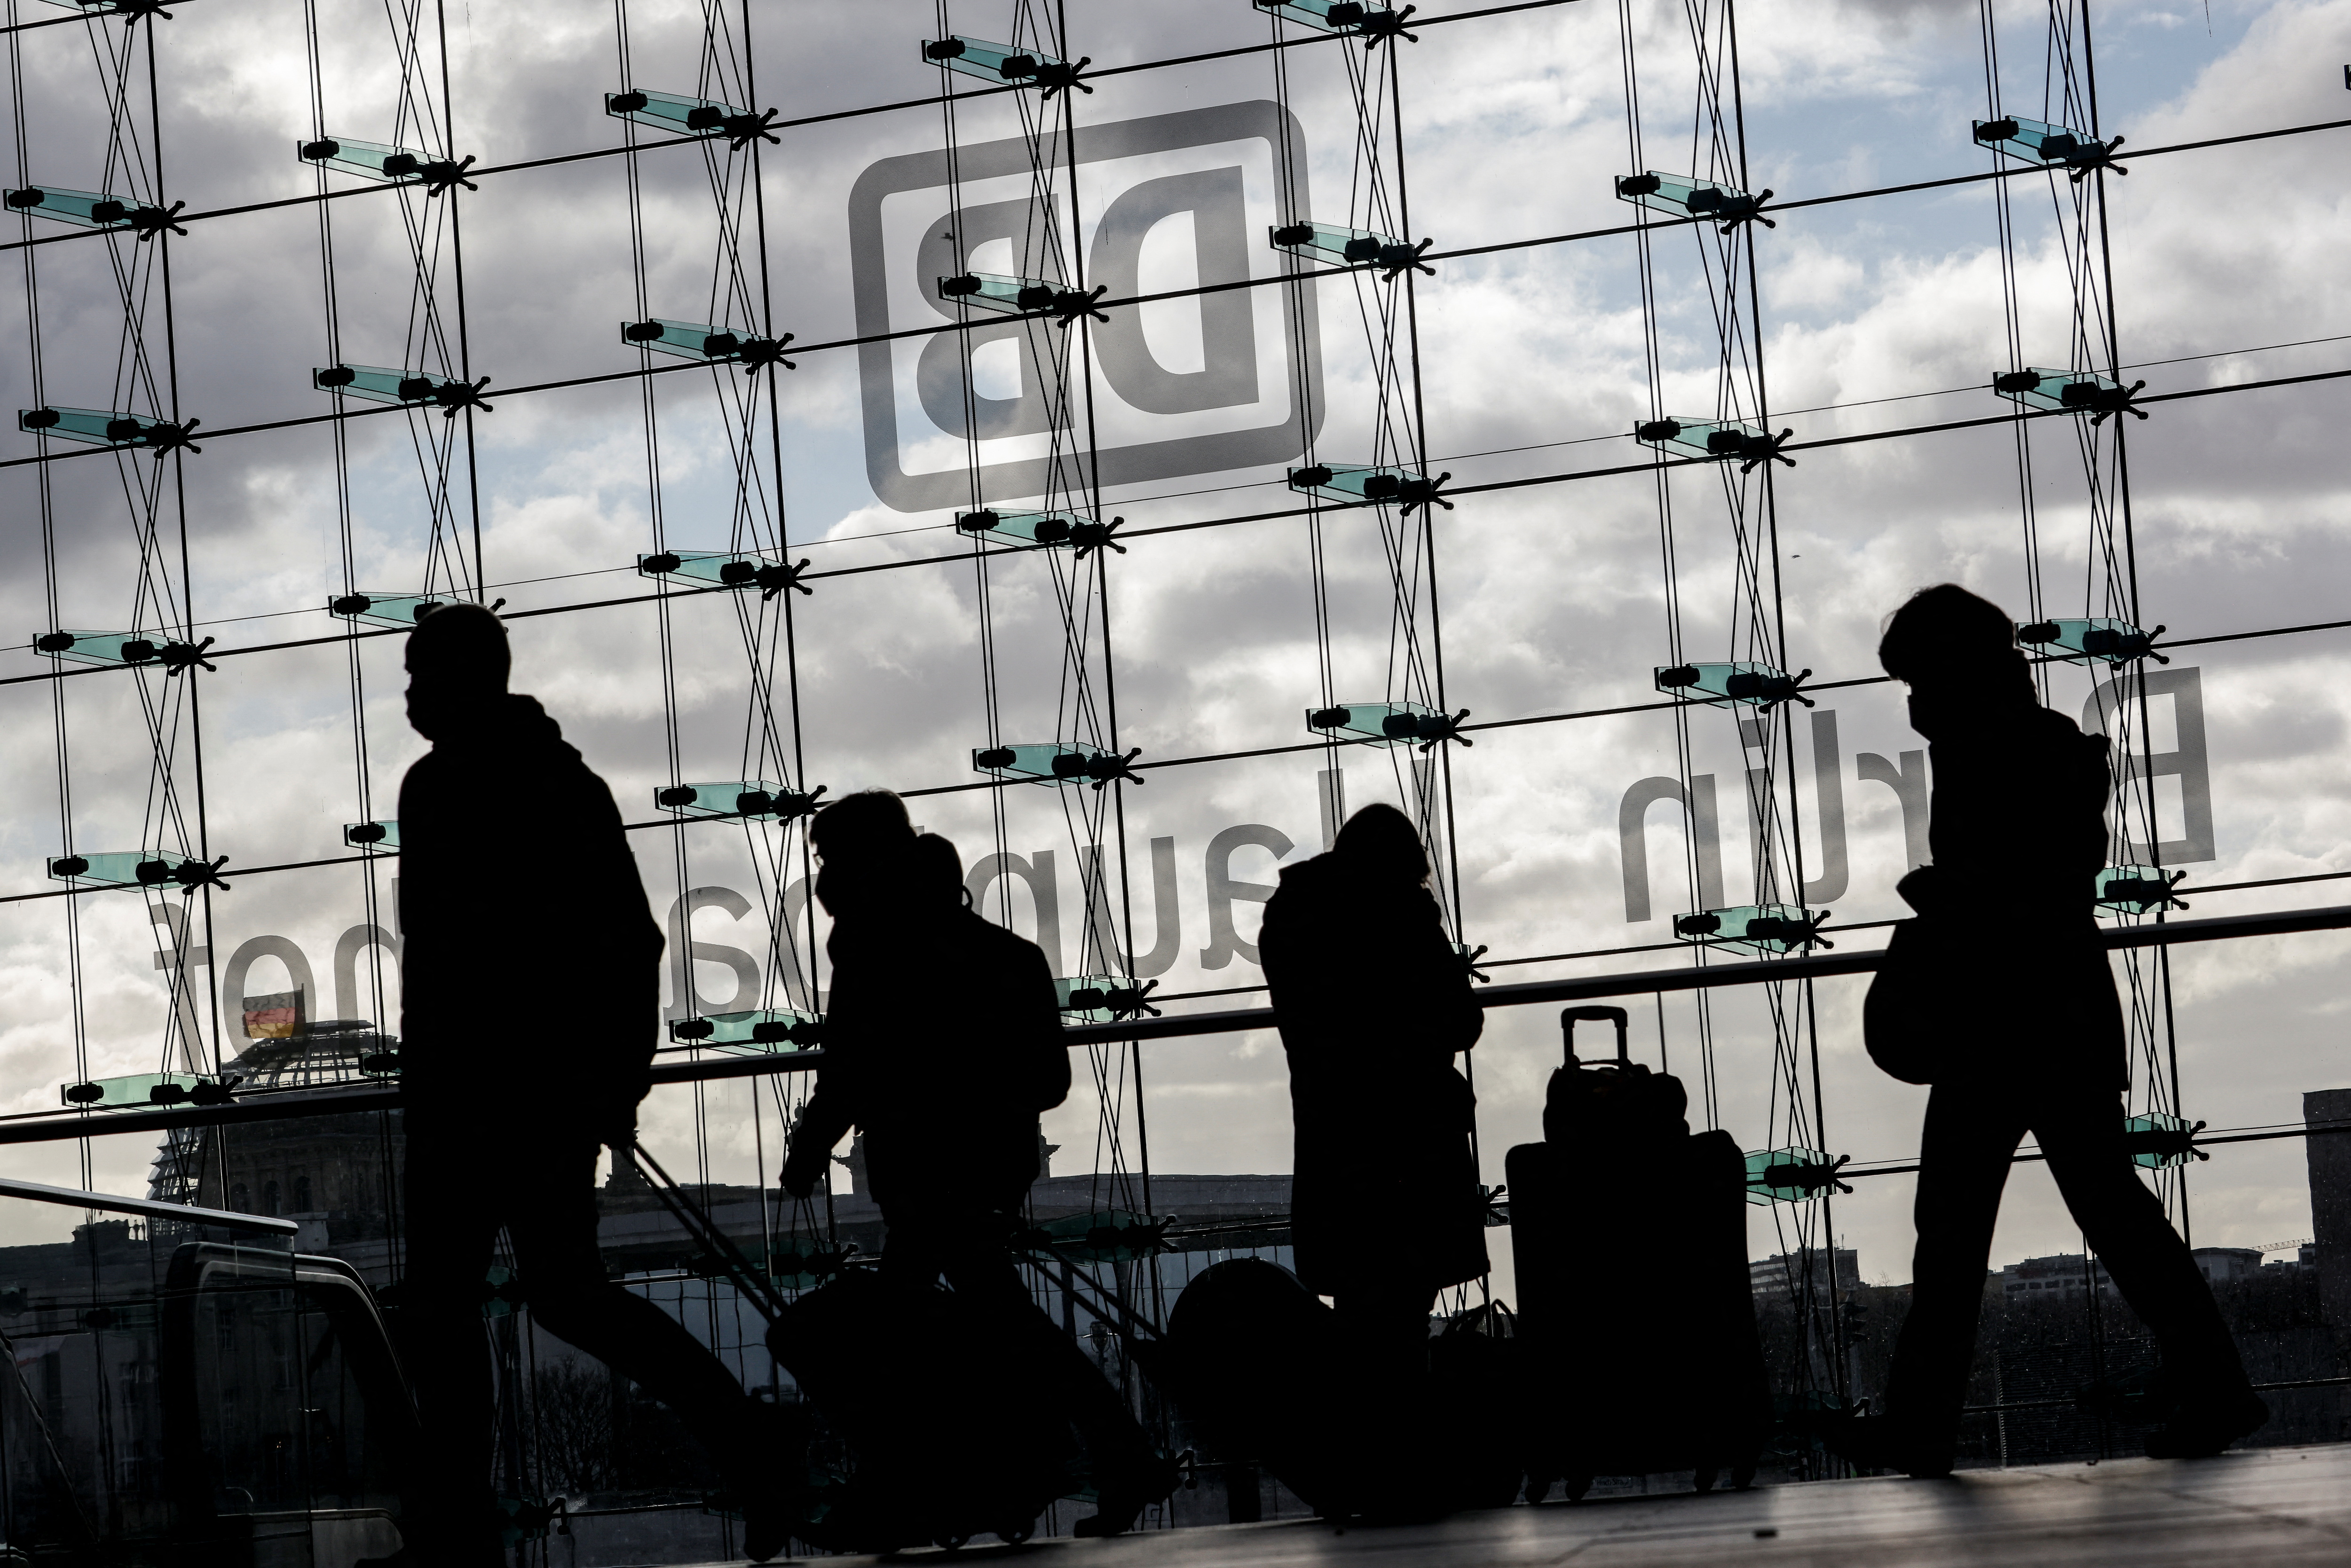 Commuters are silhouetted against a cloudy sky at the DB Berlin Hauptbahnhof or the main train station in Berlin